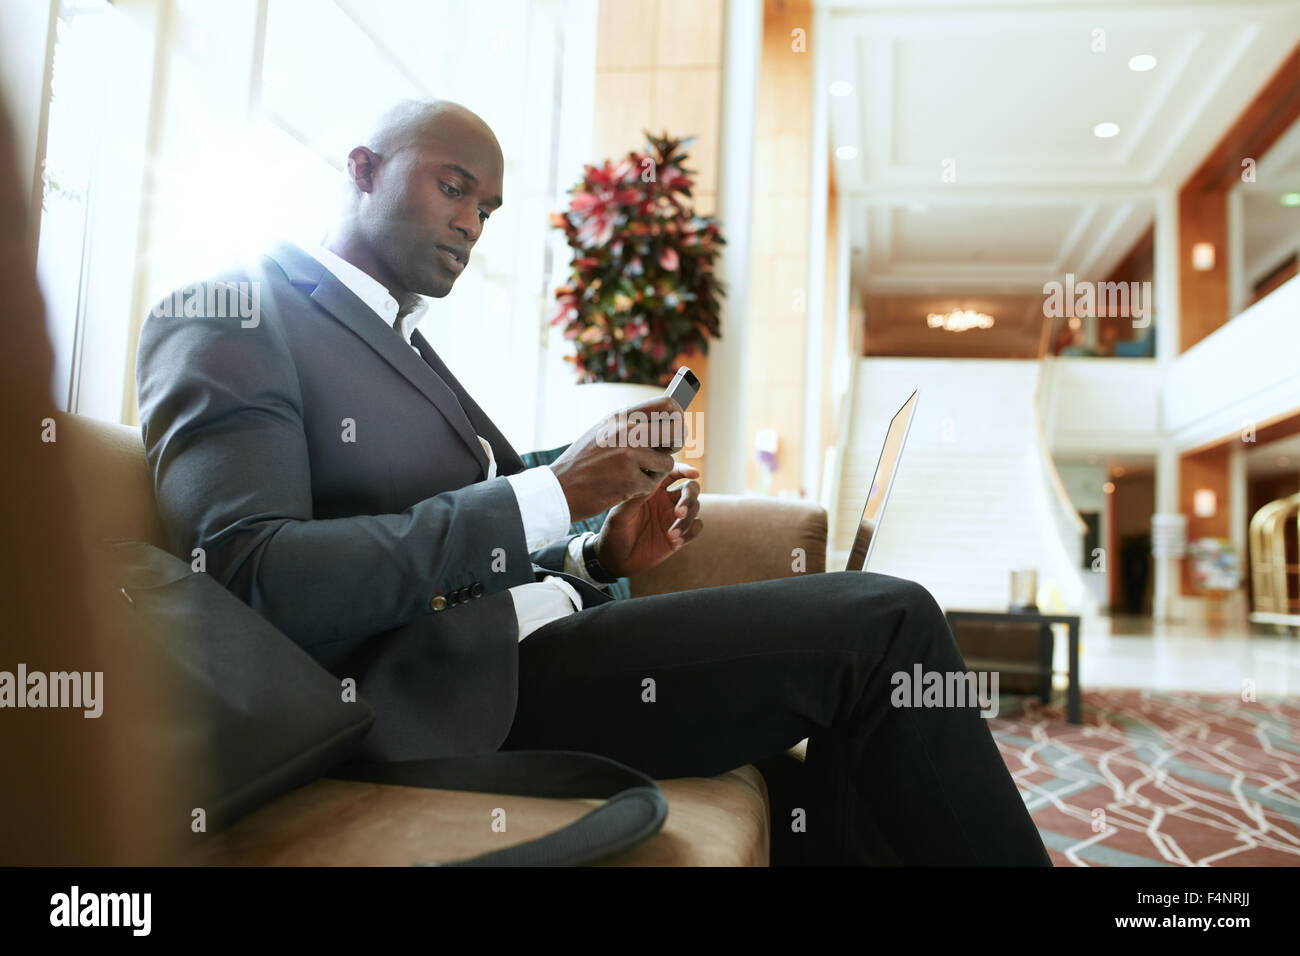 Male executive sitting on sofa looking at his mobile phone. African businessman waiting in hotel lobby. Stock Photo